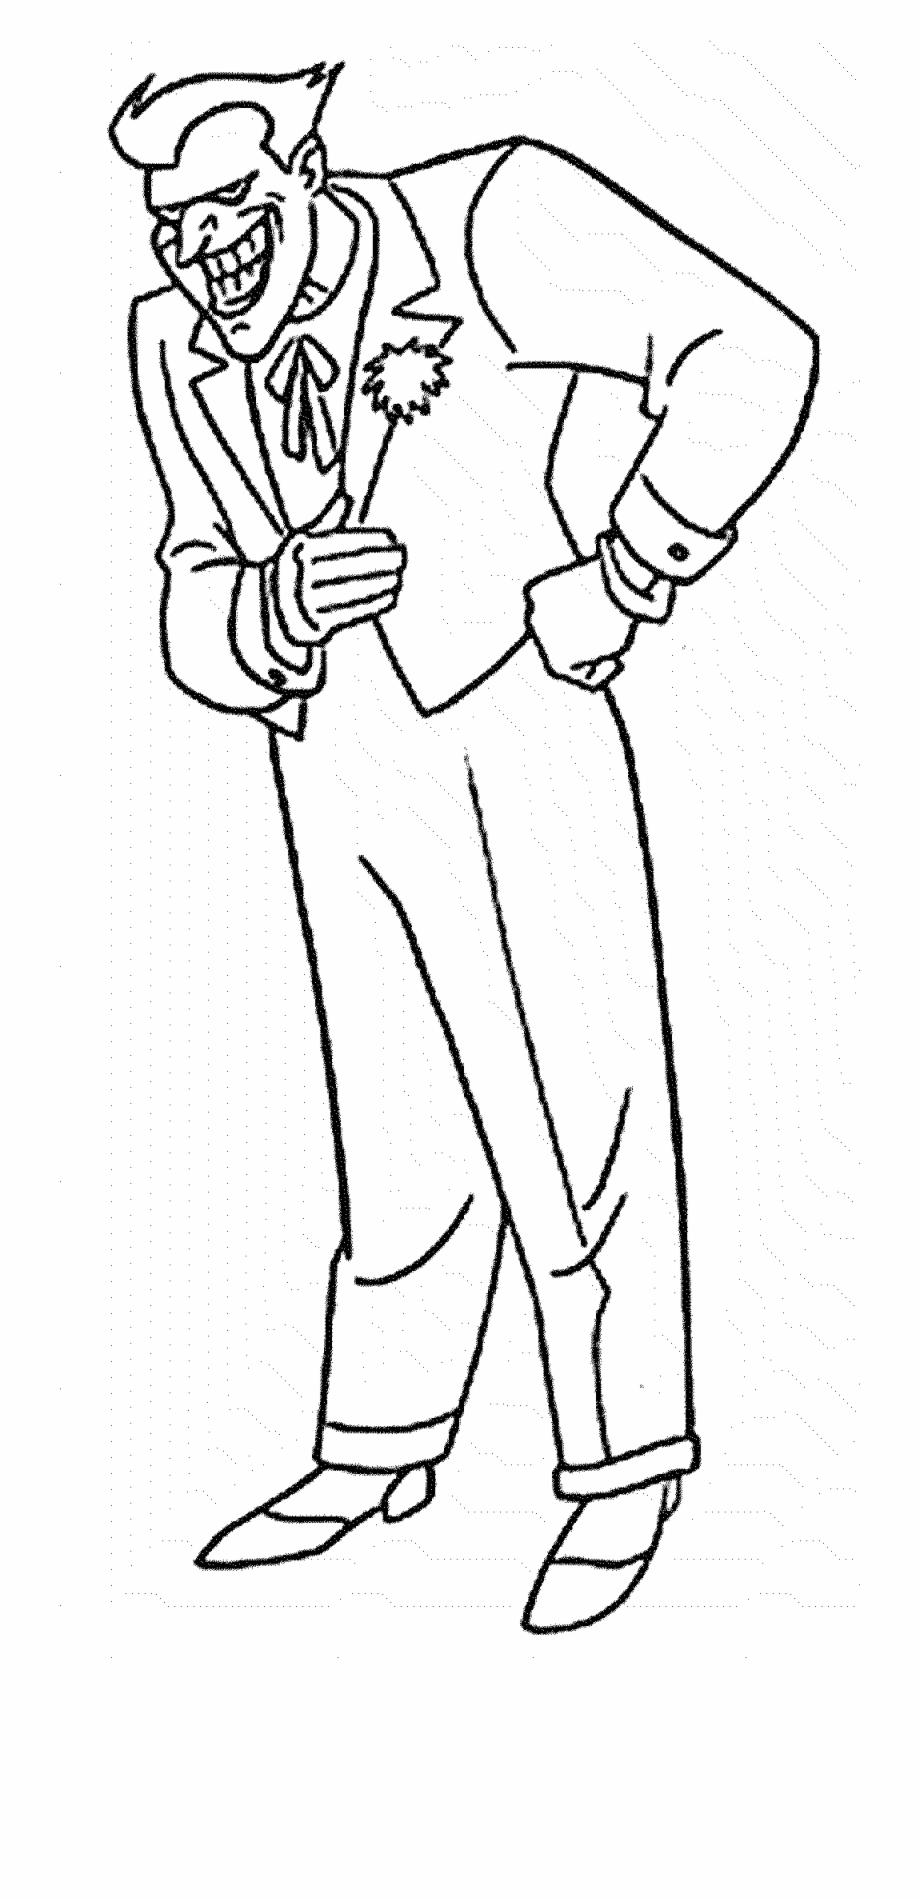 The Joker Coloring Page Joker Coloring Pages Animated